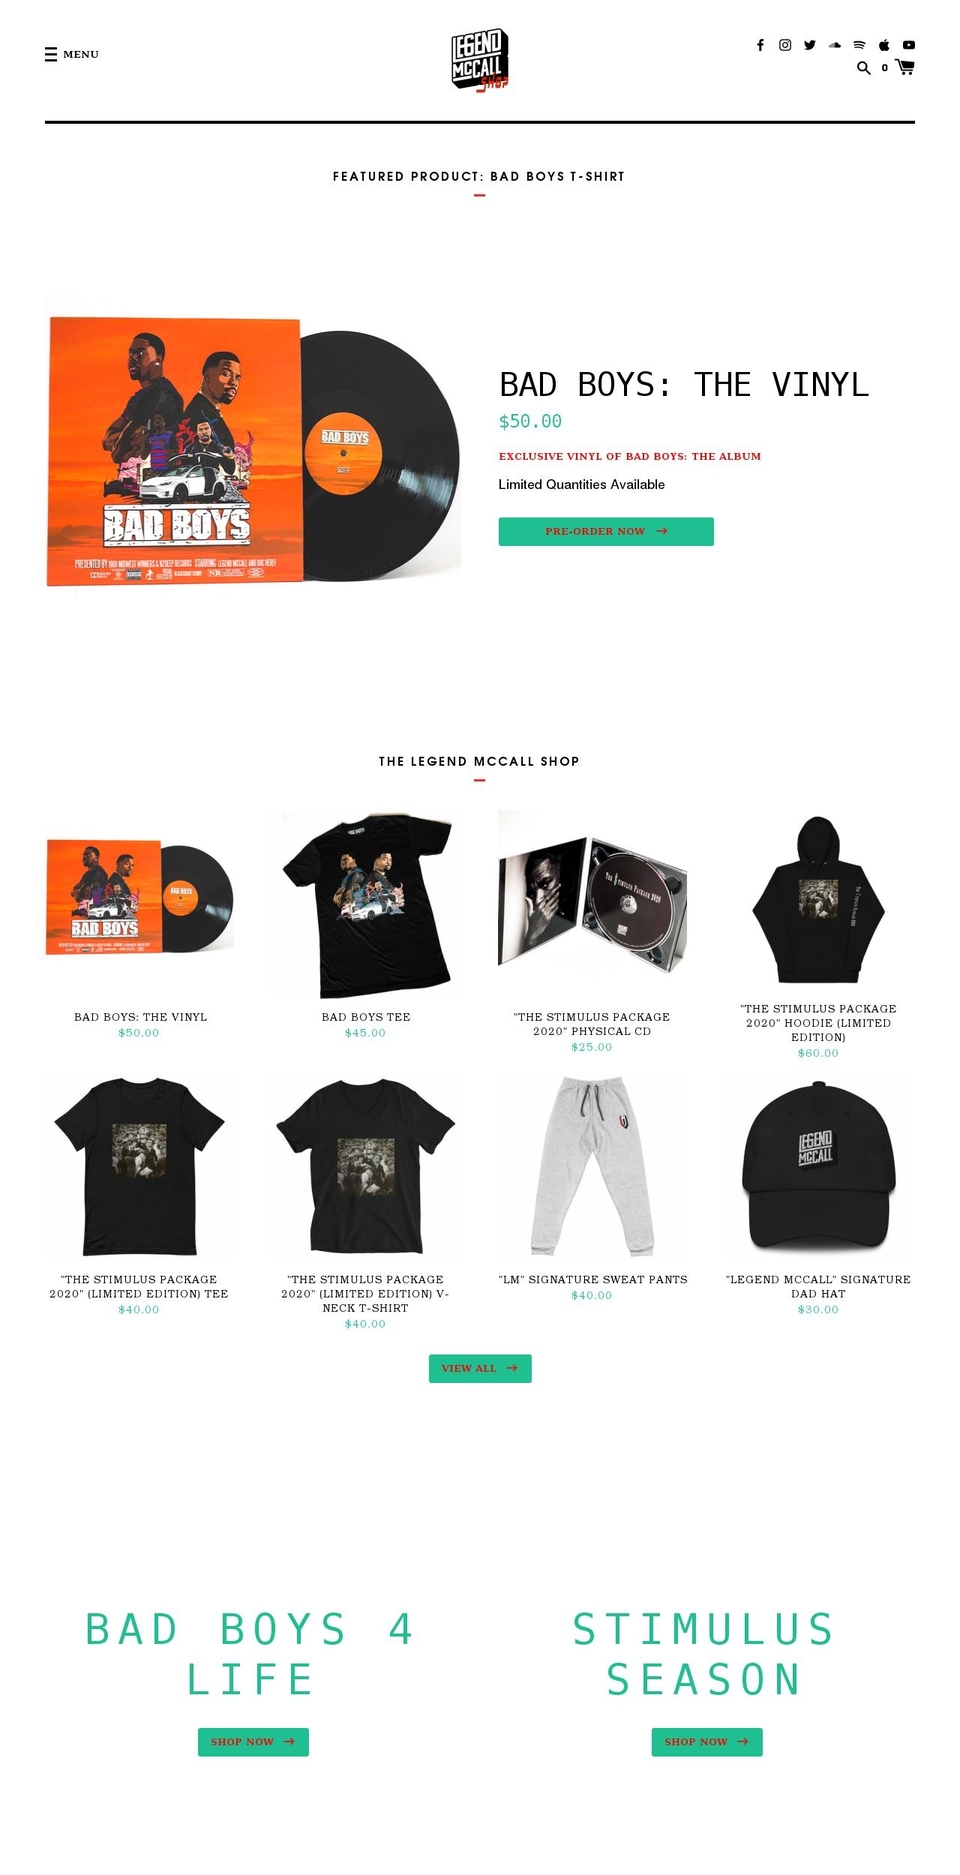 Legend Shopify theme site example shoplegendmccall.store